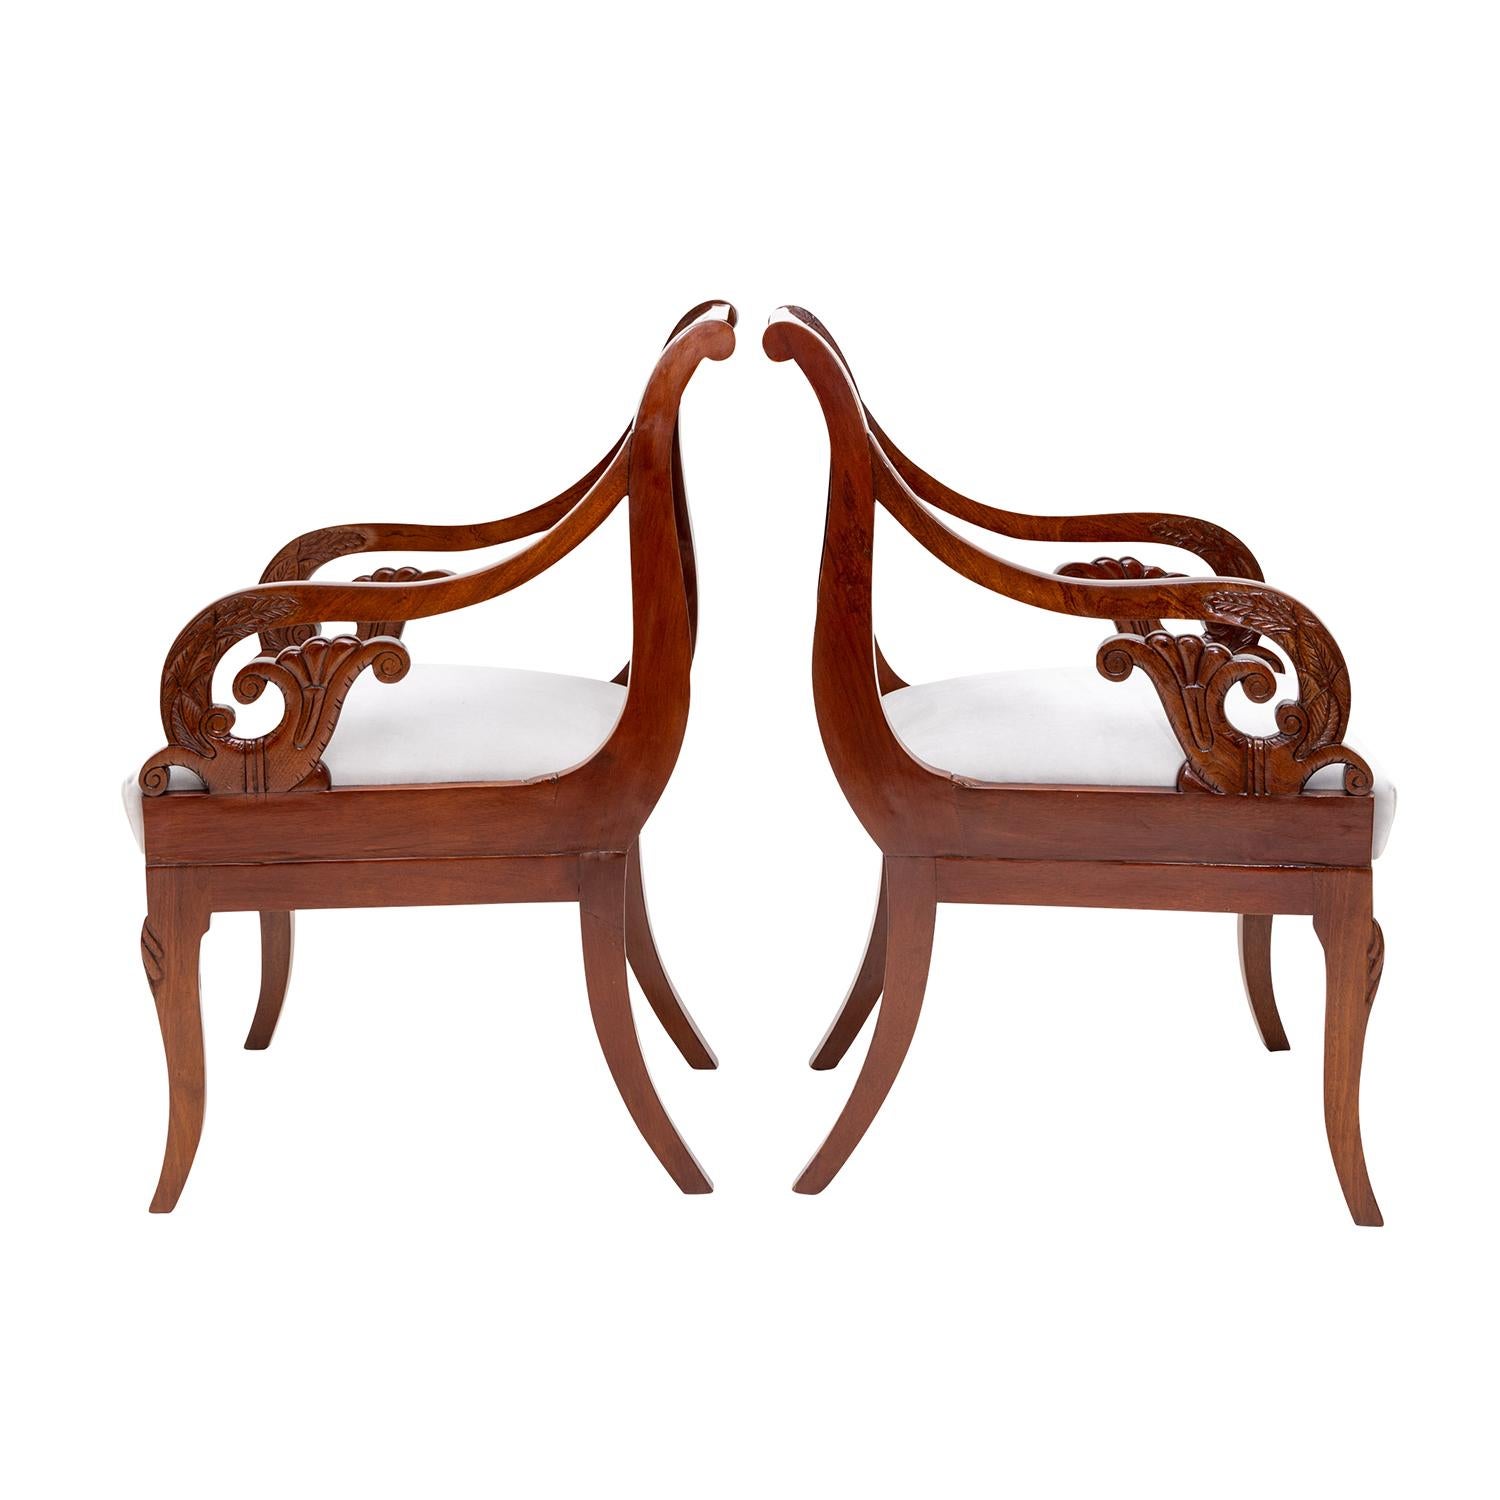 19th Century Baltic Biedermeier Pair of Antique Polished Mahogany Armchairs In Good Condition For Sale In West Palm Beach, FL